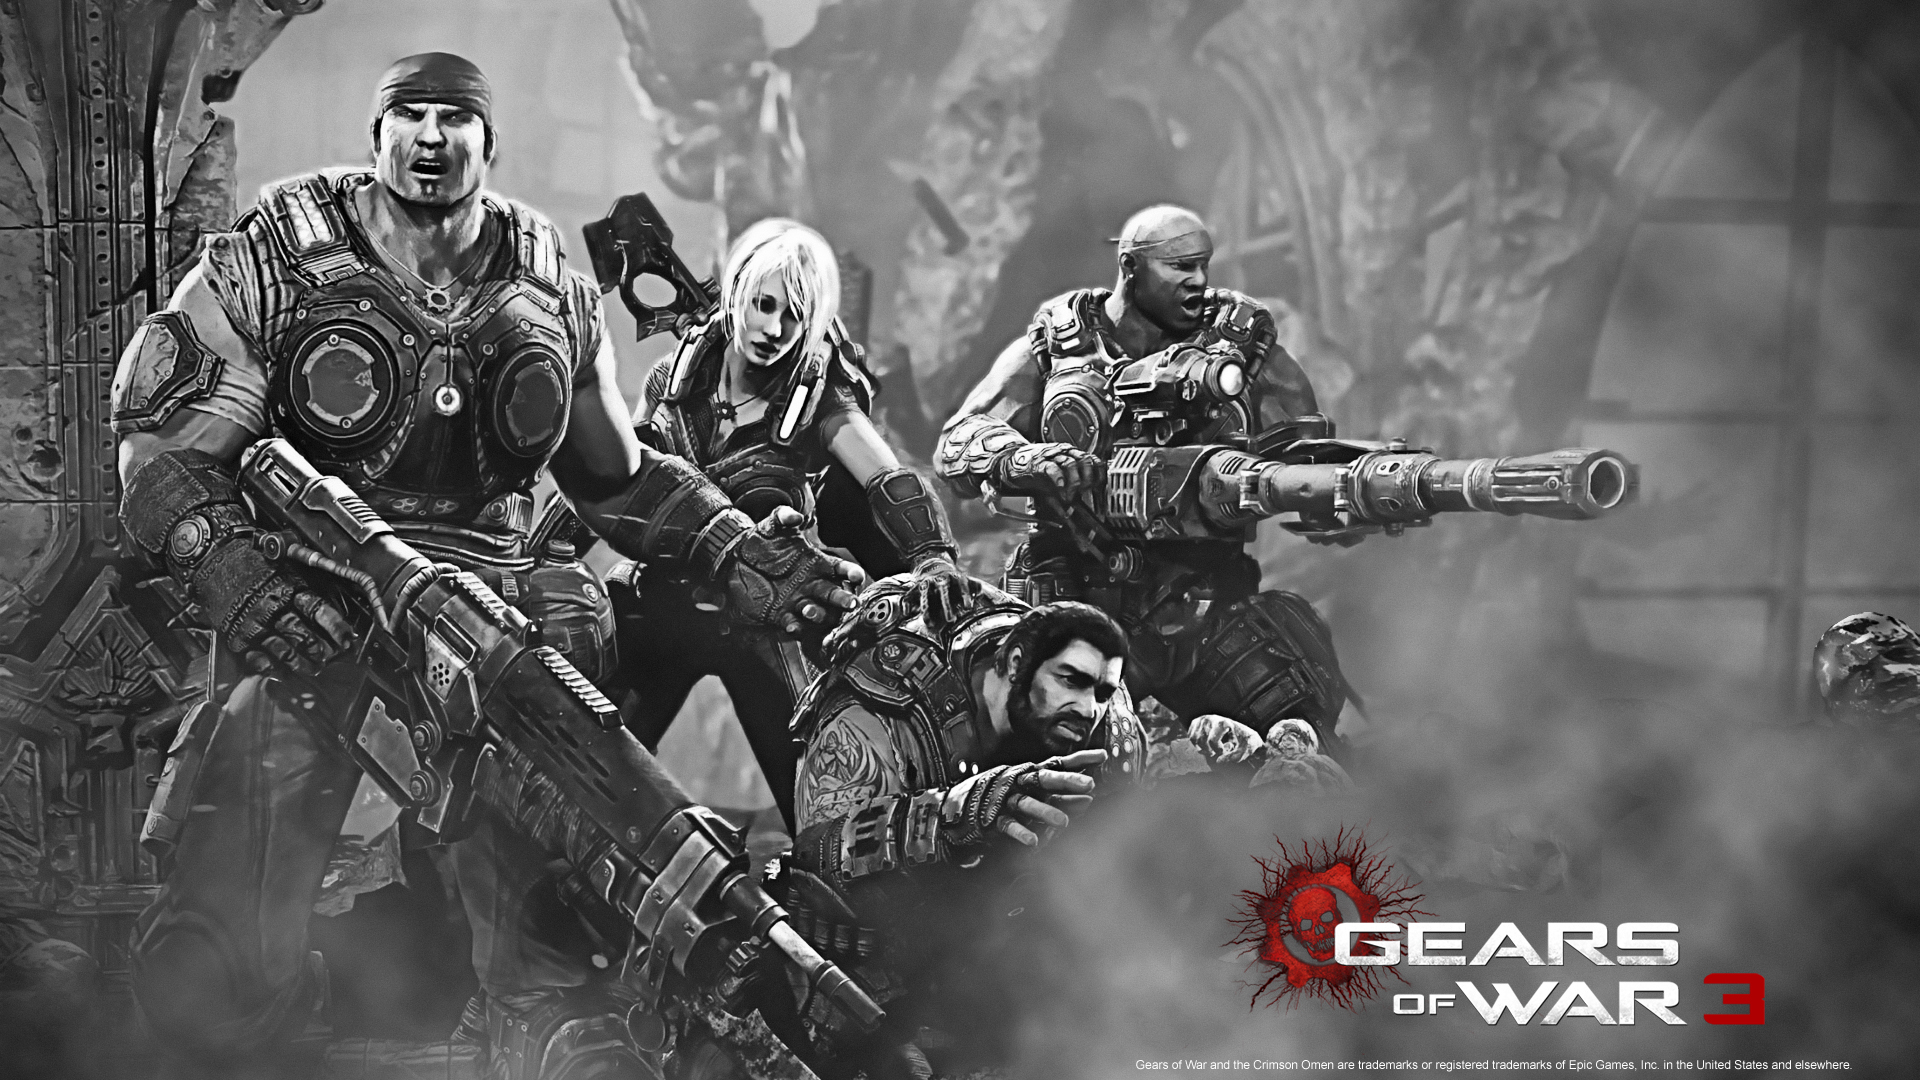 Gears of War 3: Brothers to the End –